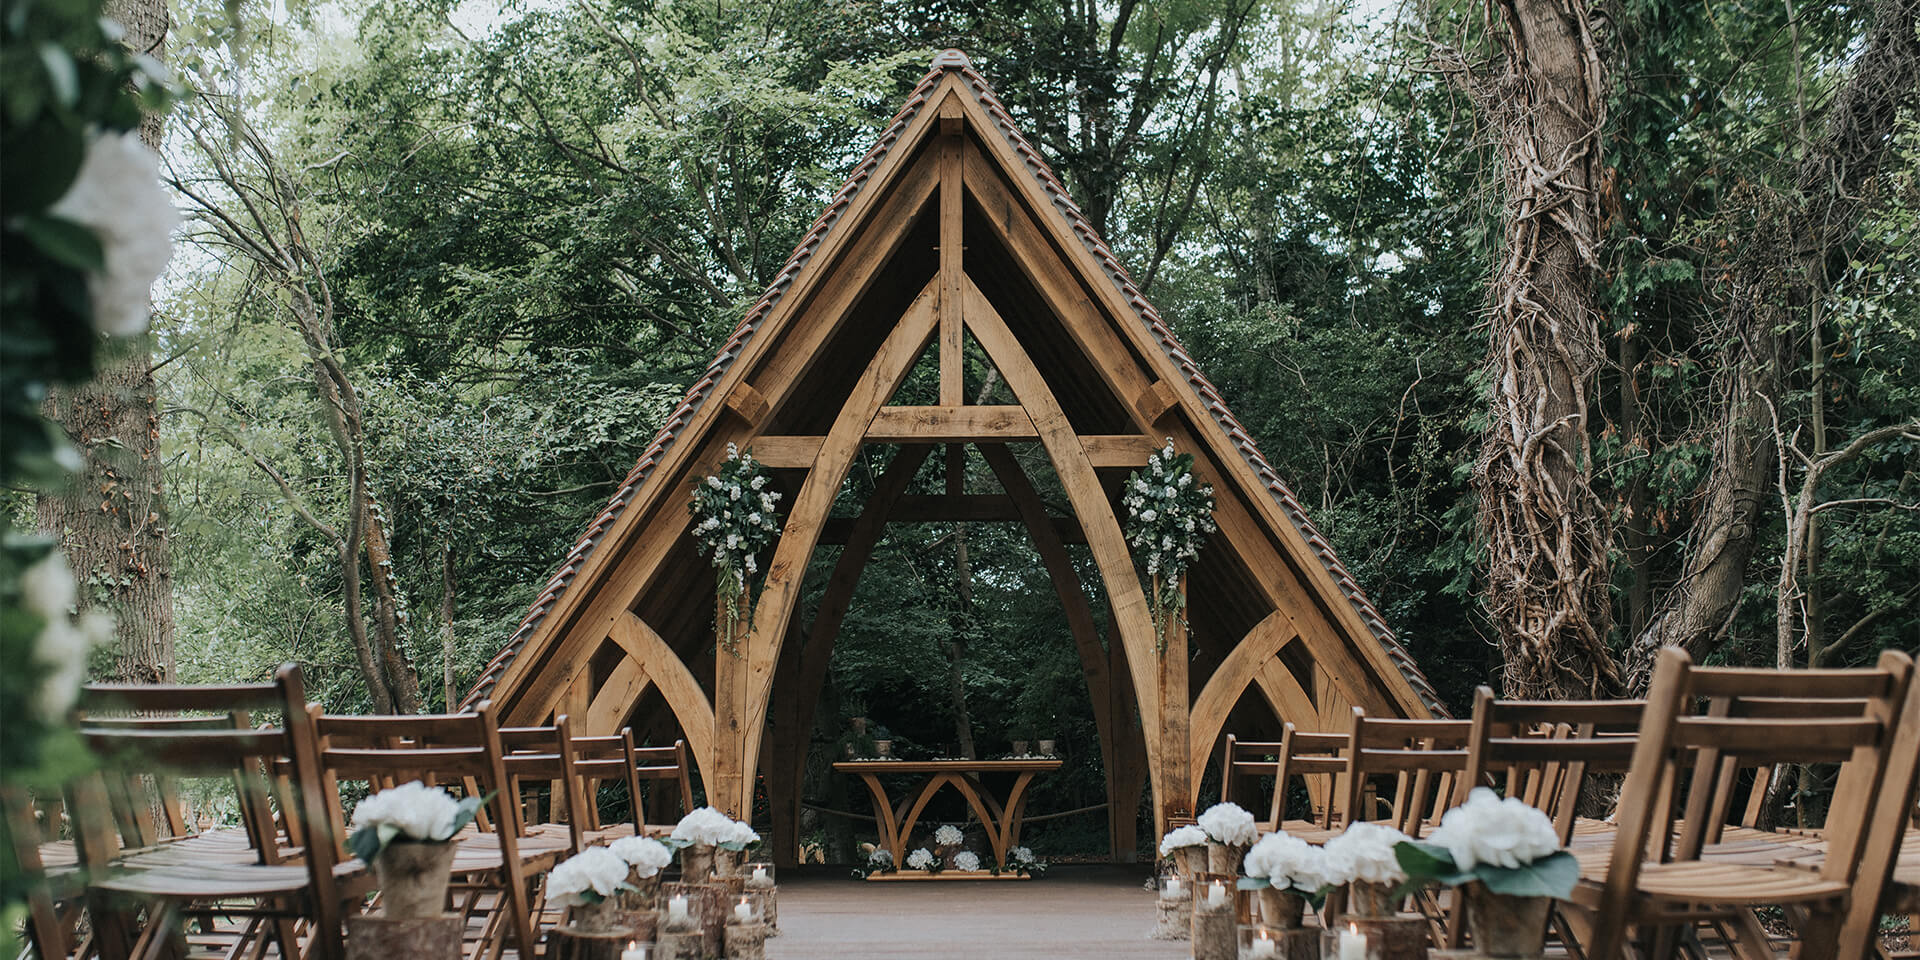 The Spinney makes the perfect outdoor wedding ceremony space